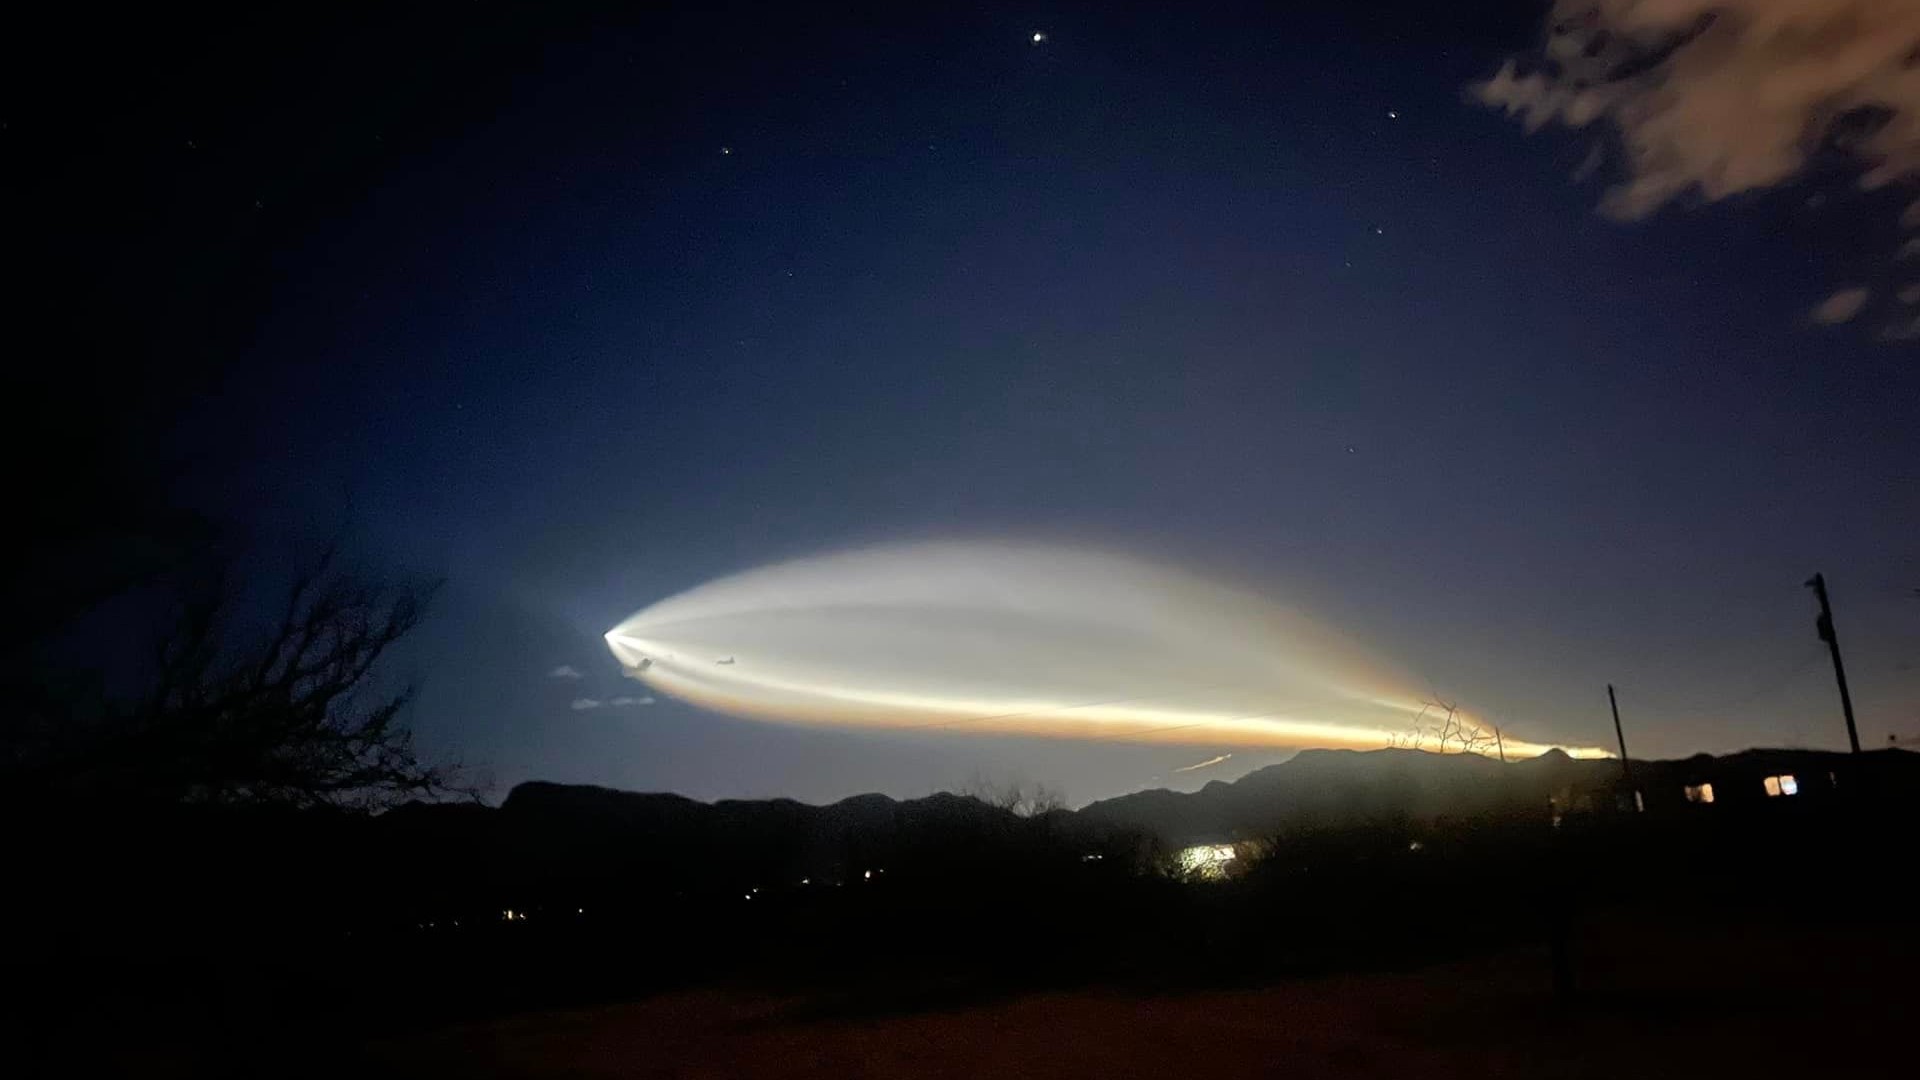 San Angelo resident Heather Epley was with her parents in Arizona, and caught a Starlink satellite launched from Vanderberg Space Force Base on video.